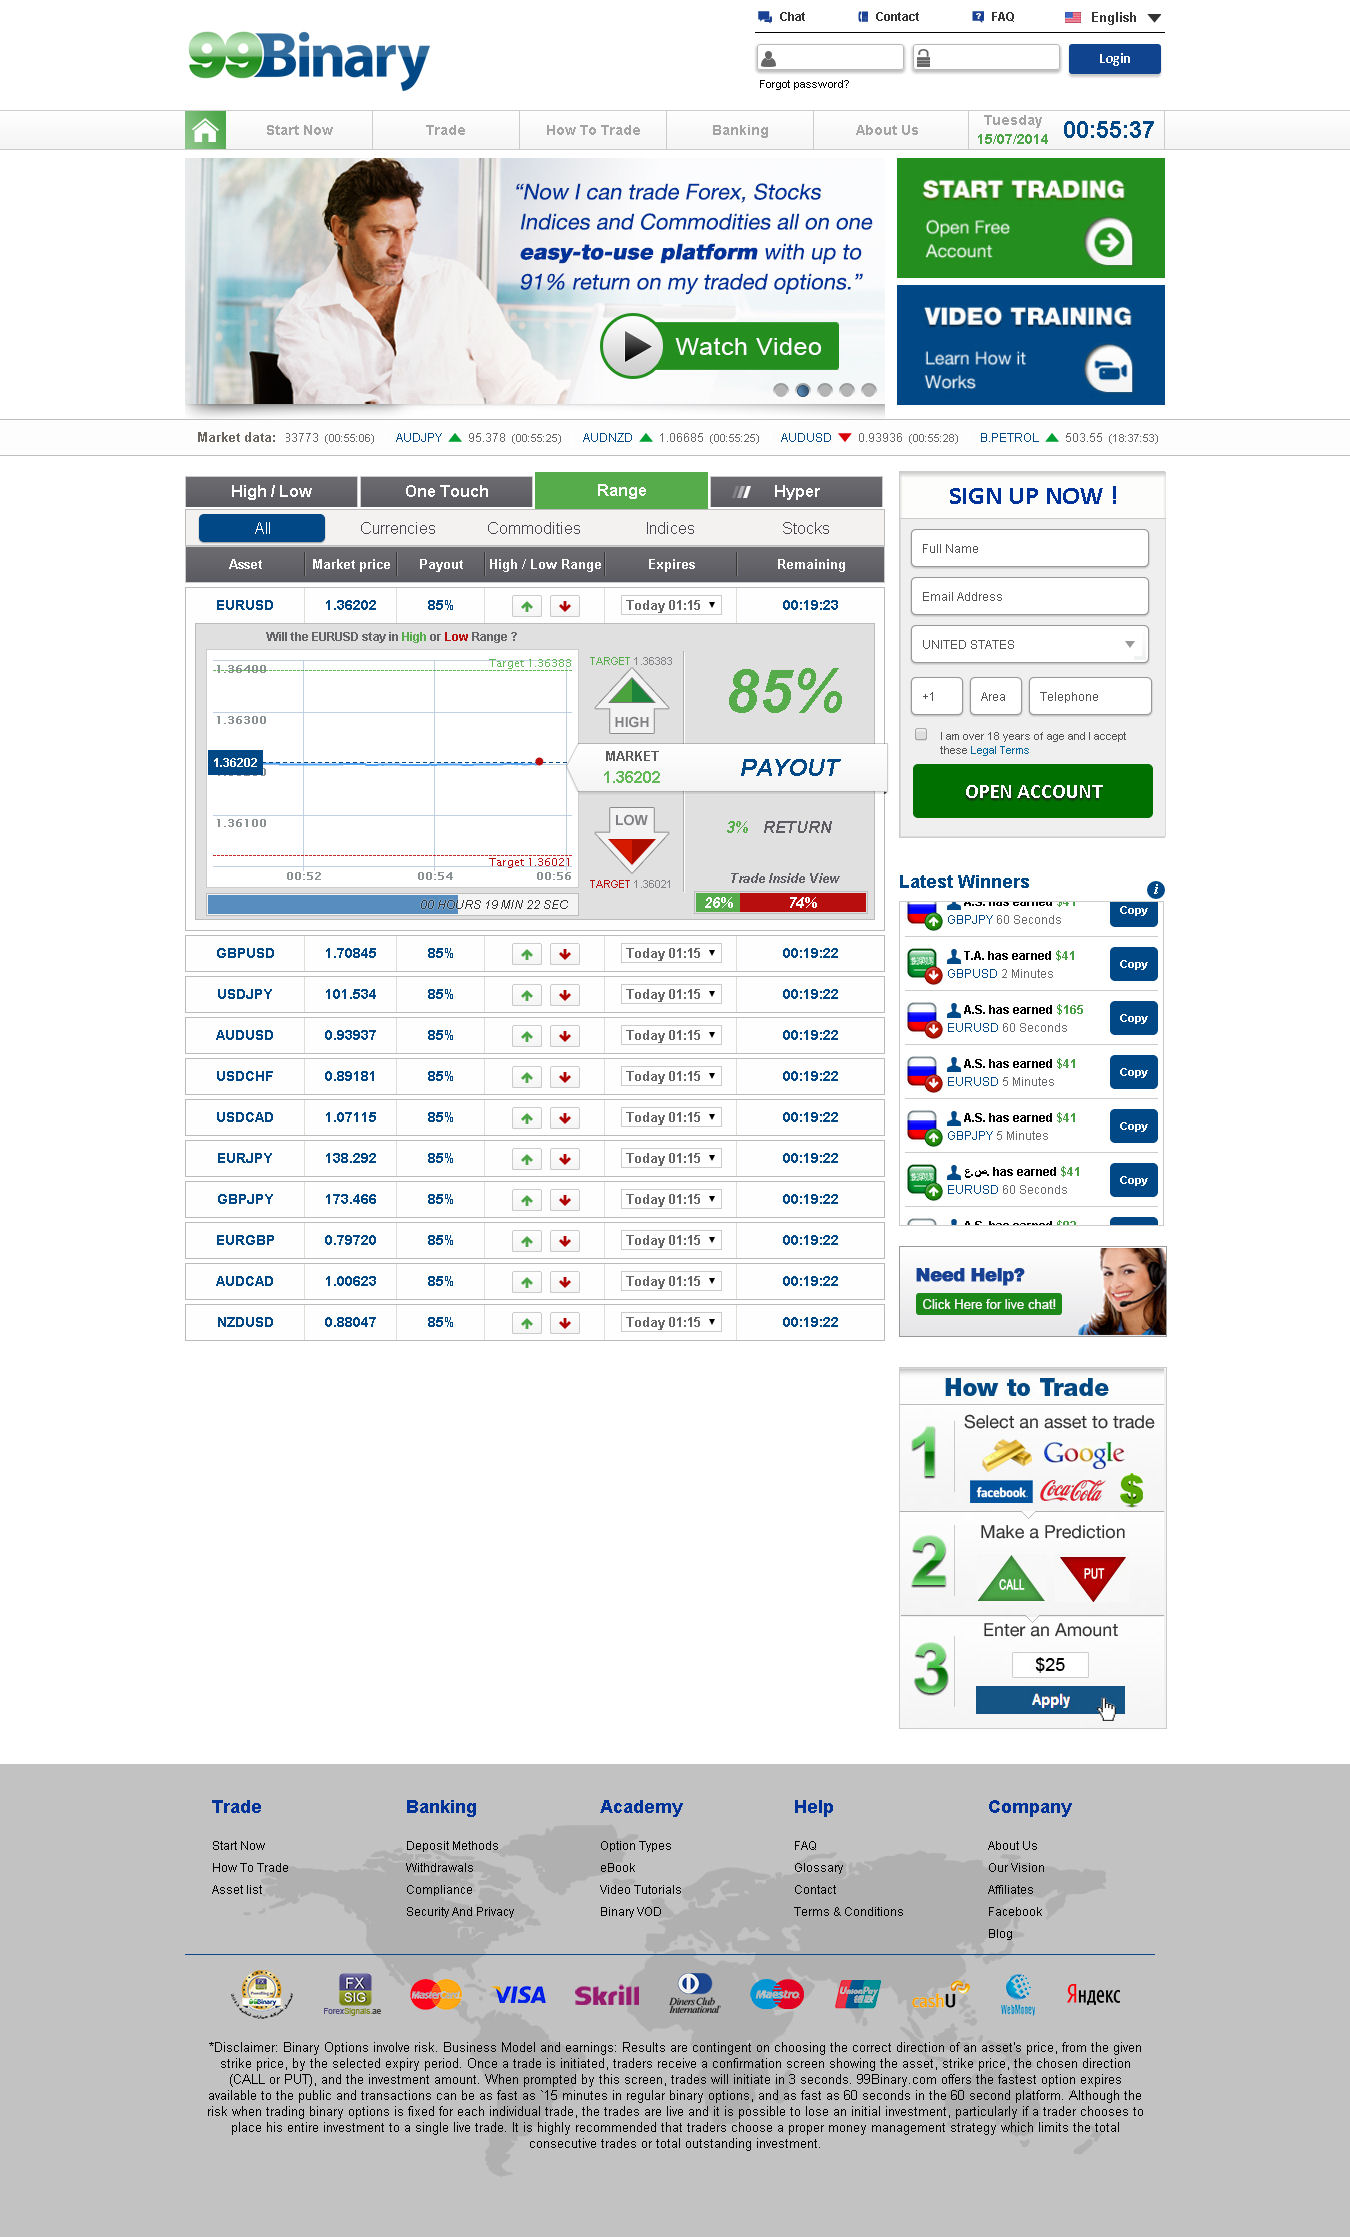 Binary options brokers accept paypal